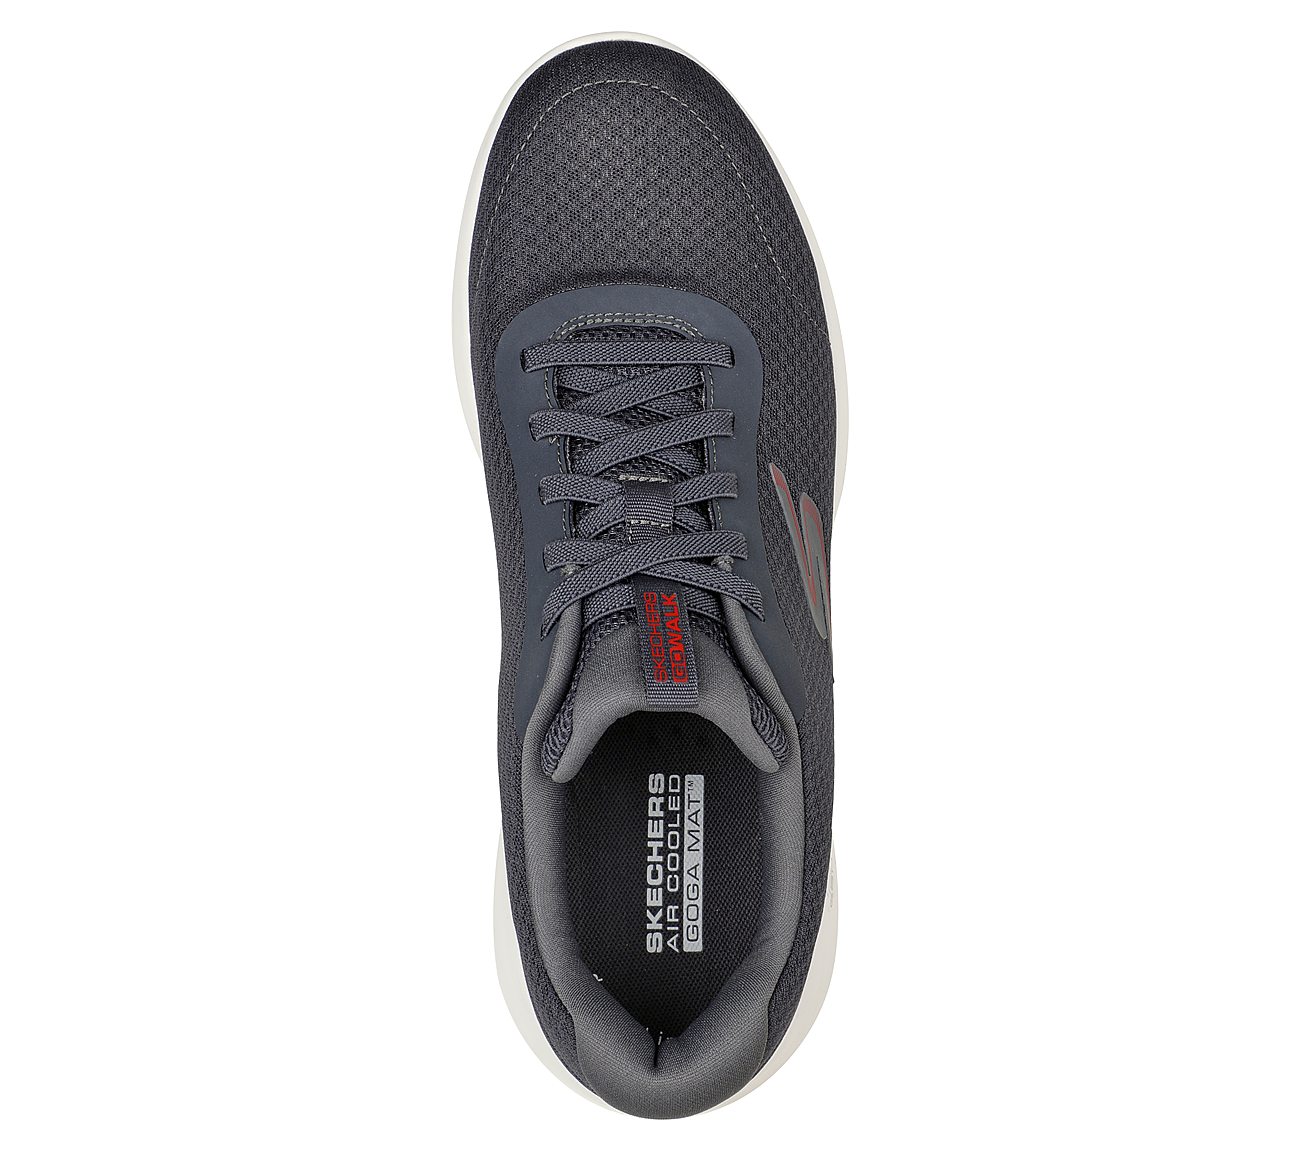 GO WALK MAX - MIDSHORE, CHARCOAL/RED Footwear Top View